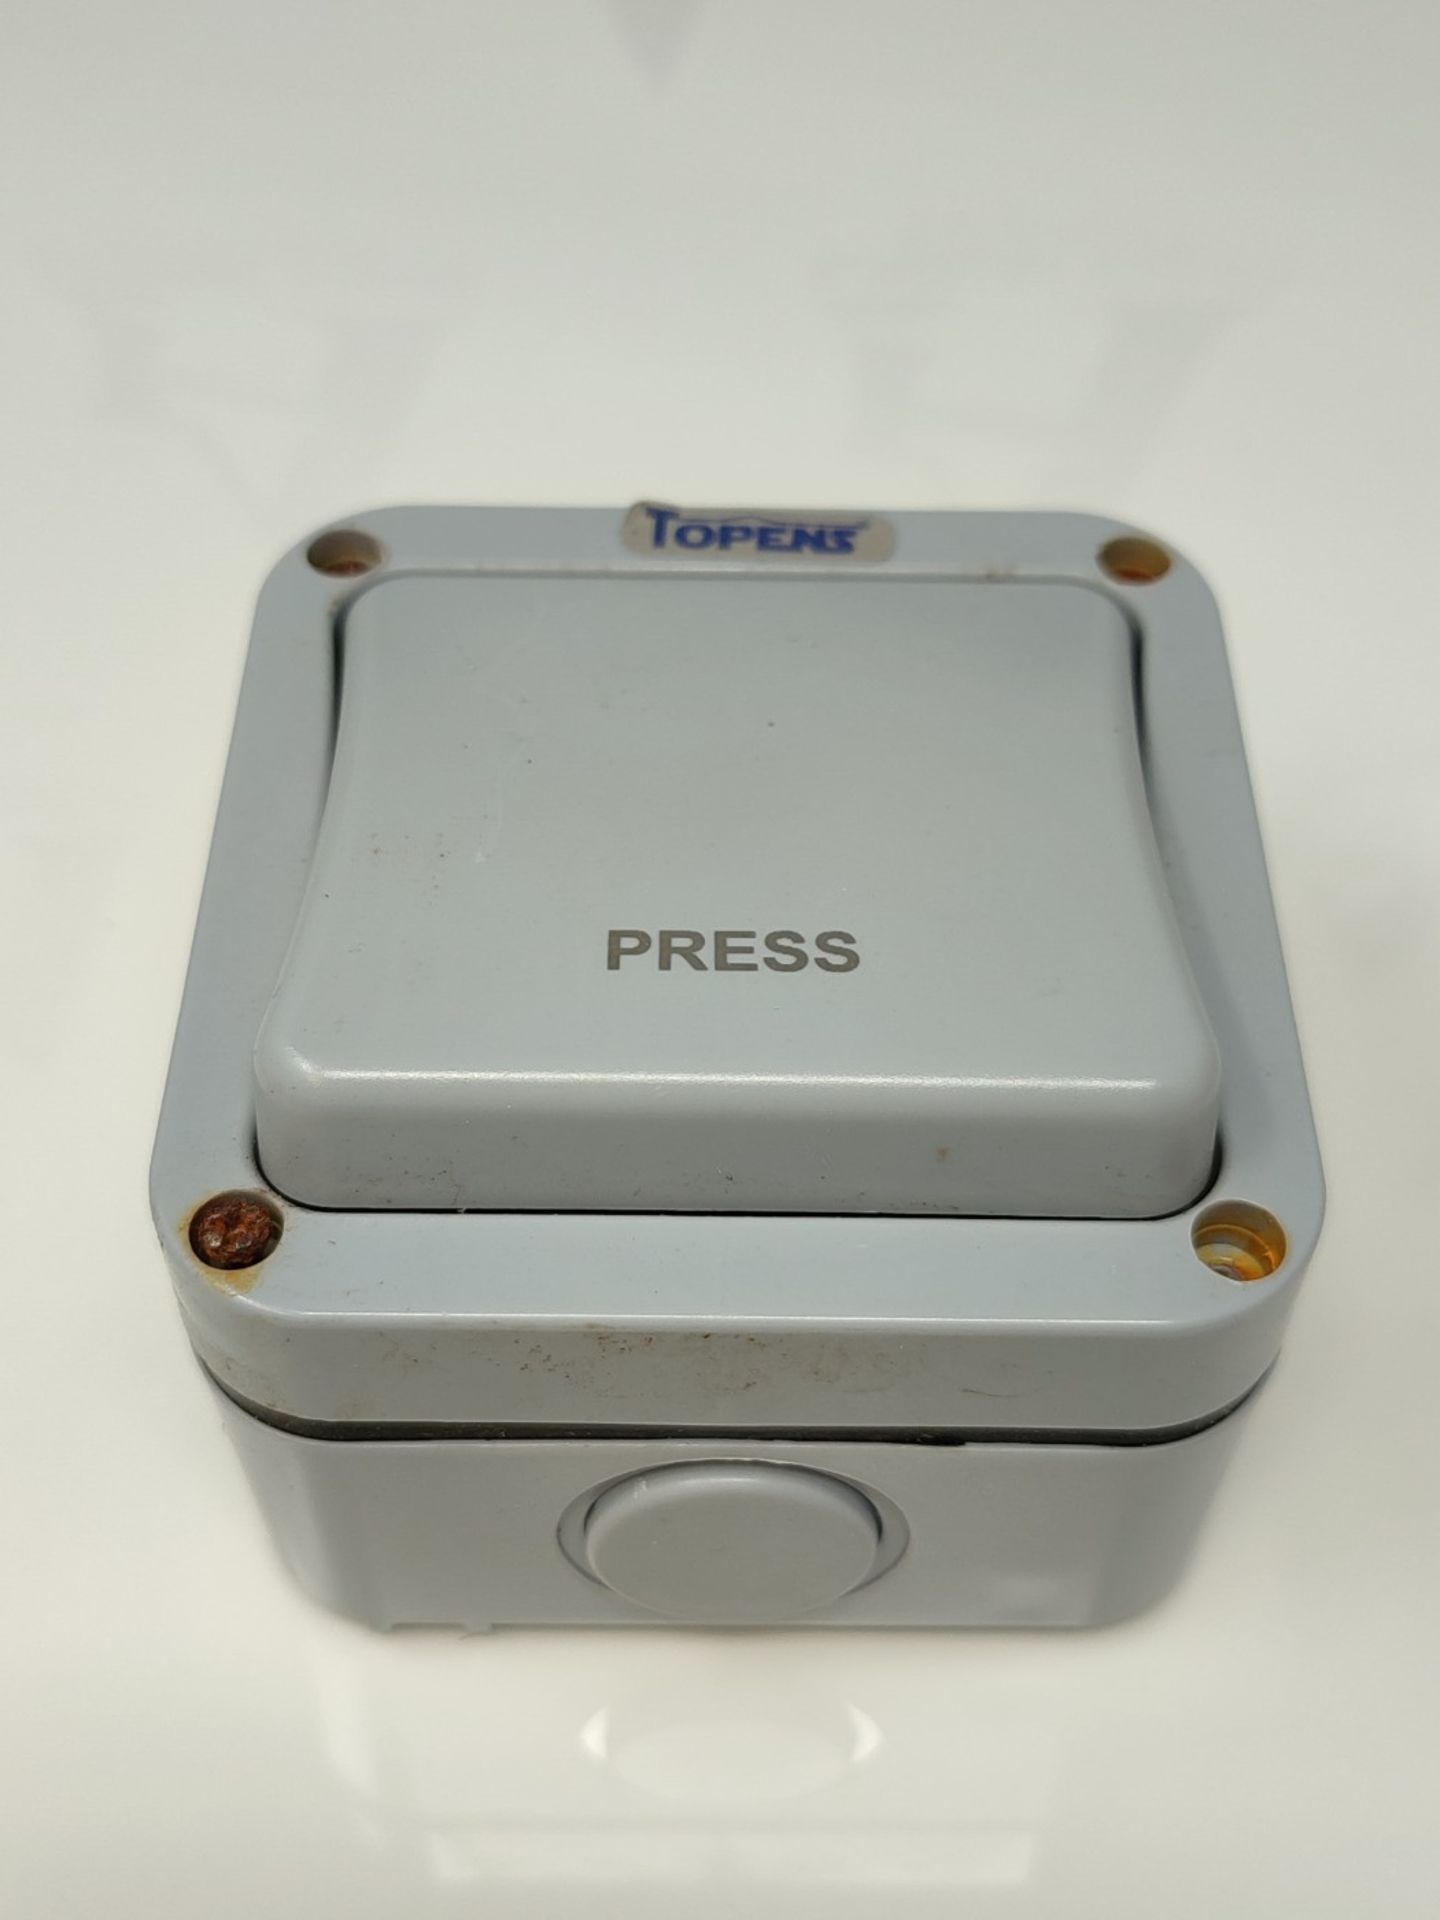 TOPENS TC148 Waterproof Wall Push Button Surface Mounted Wired Release Switch for Auto